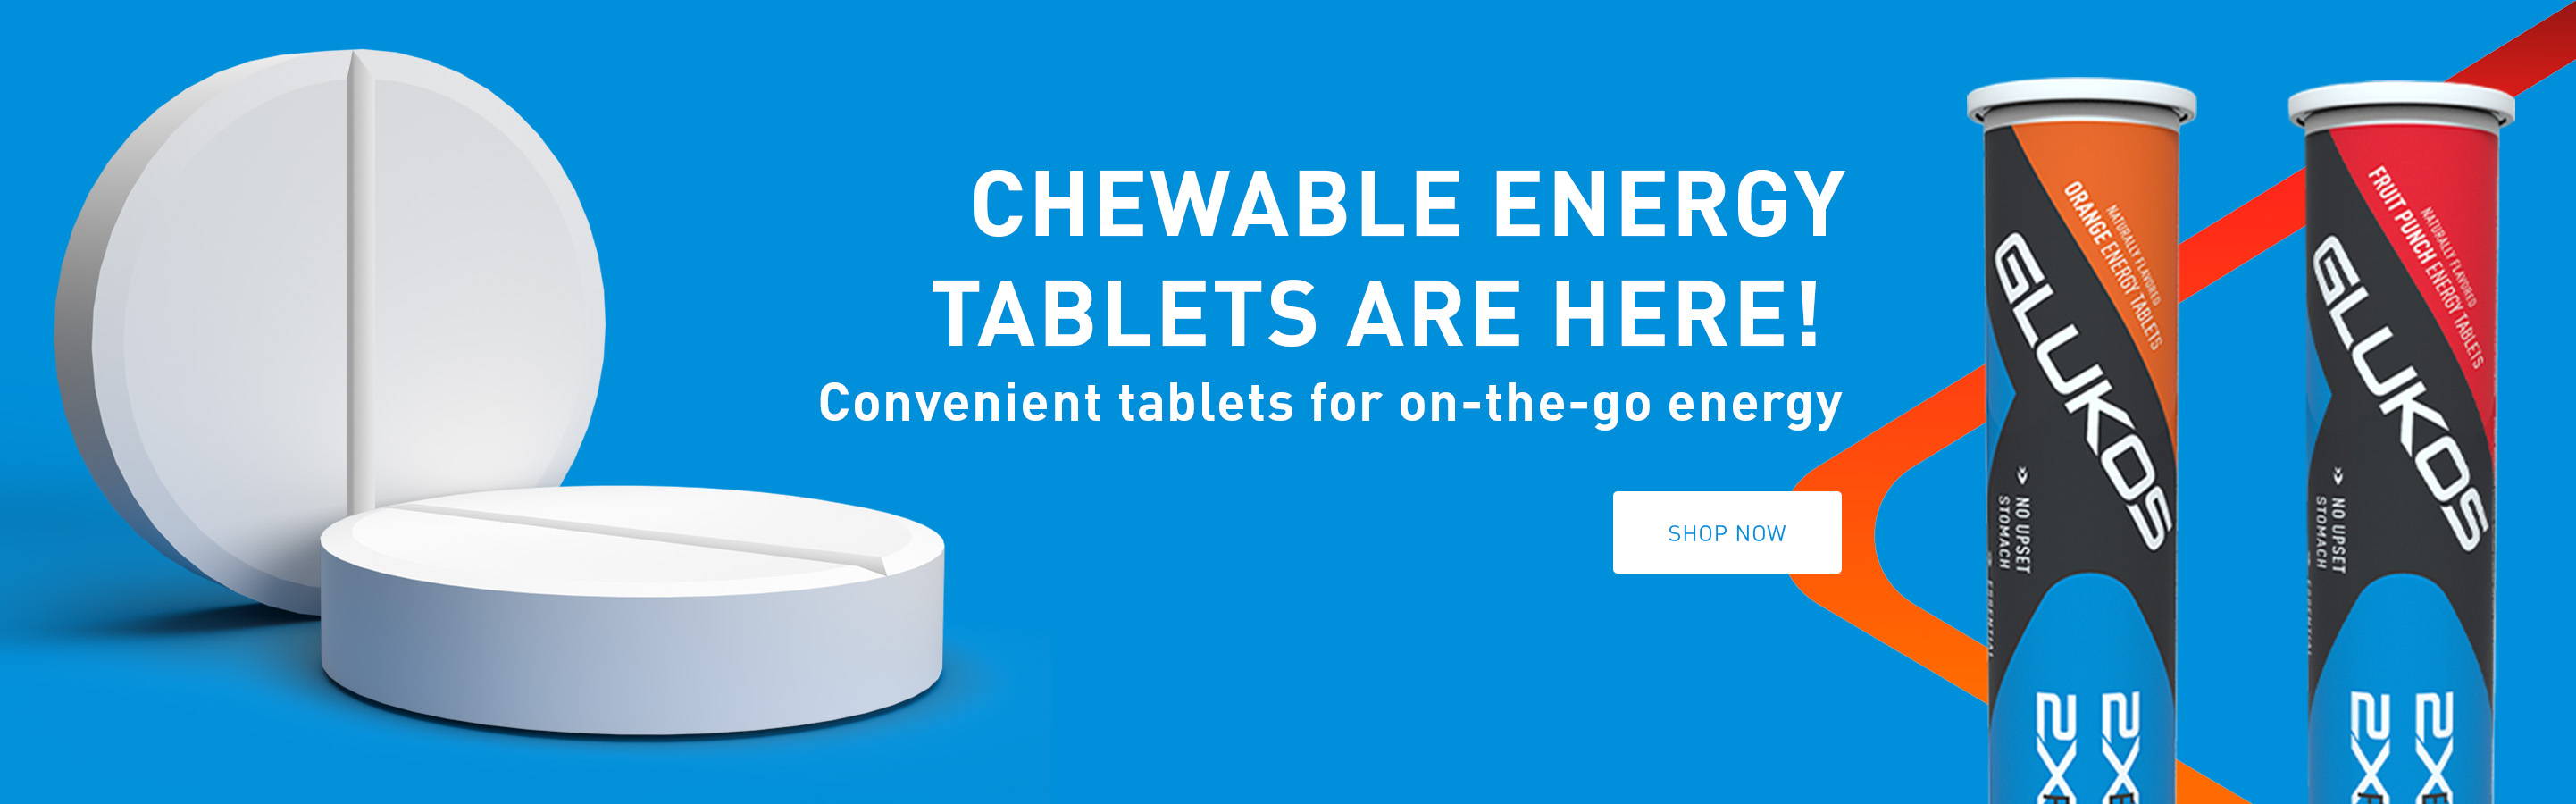 Chewable energy tablets are here! Convenient tablets for on-the-go energy.